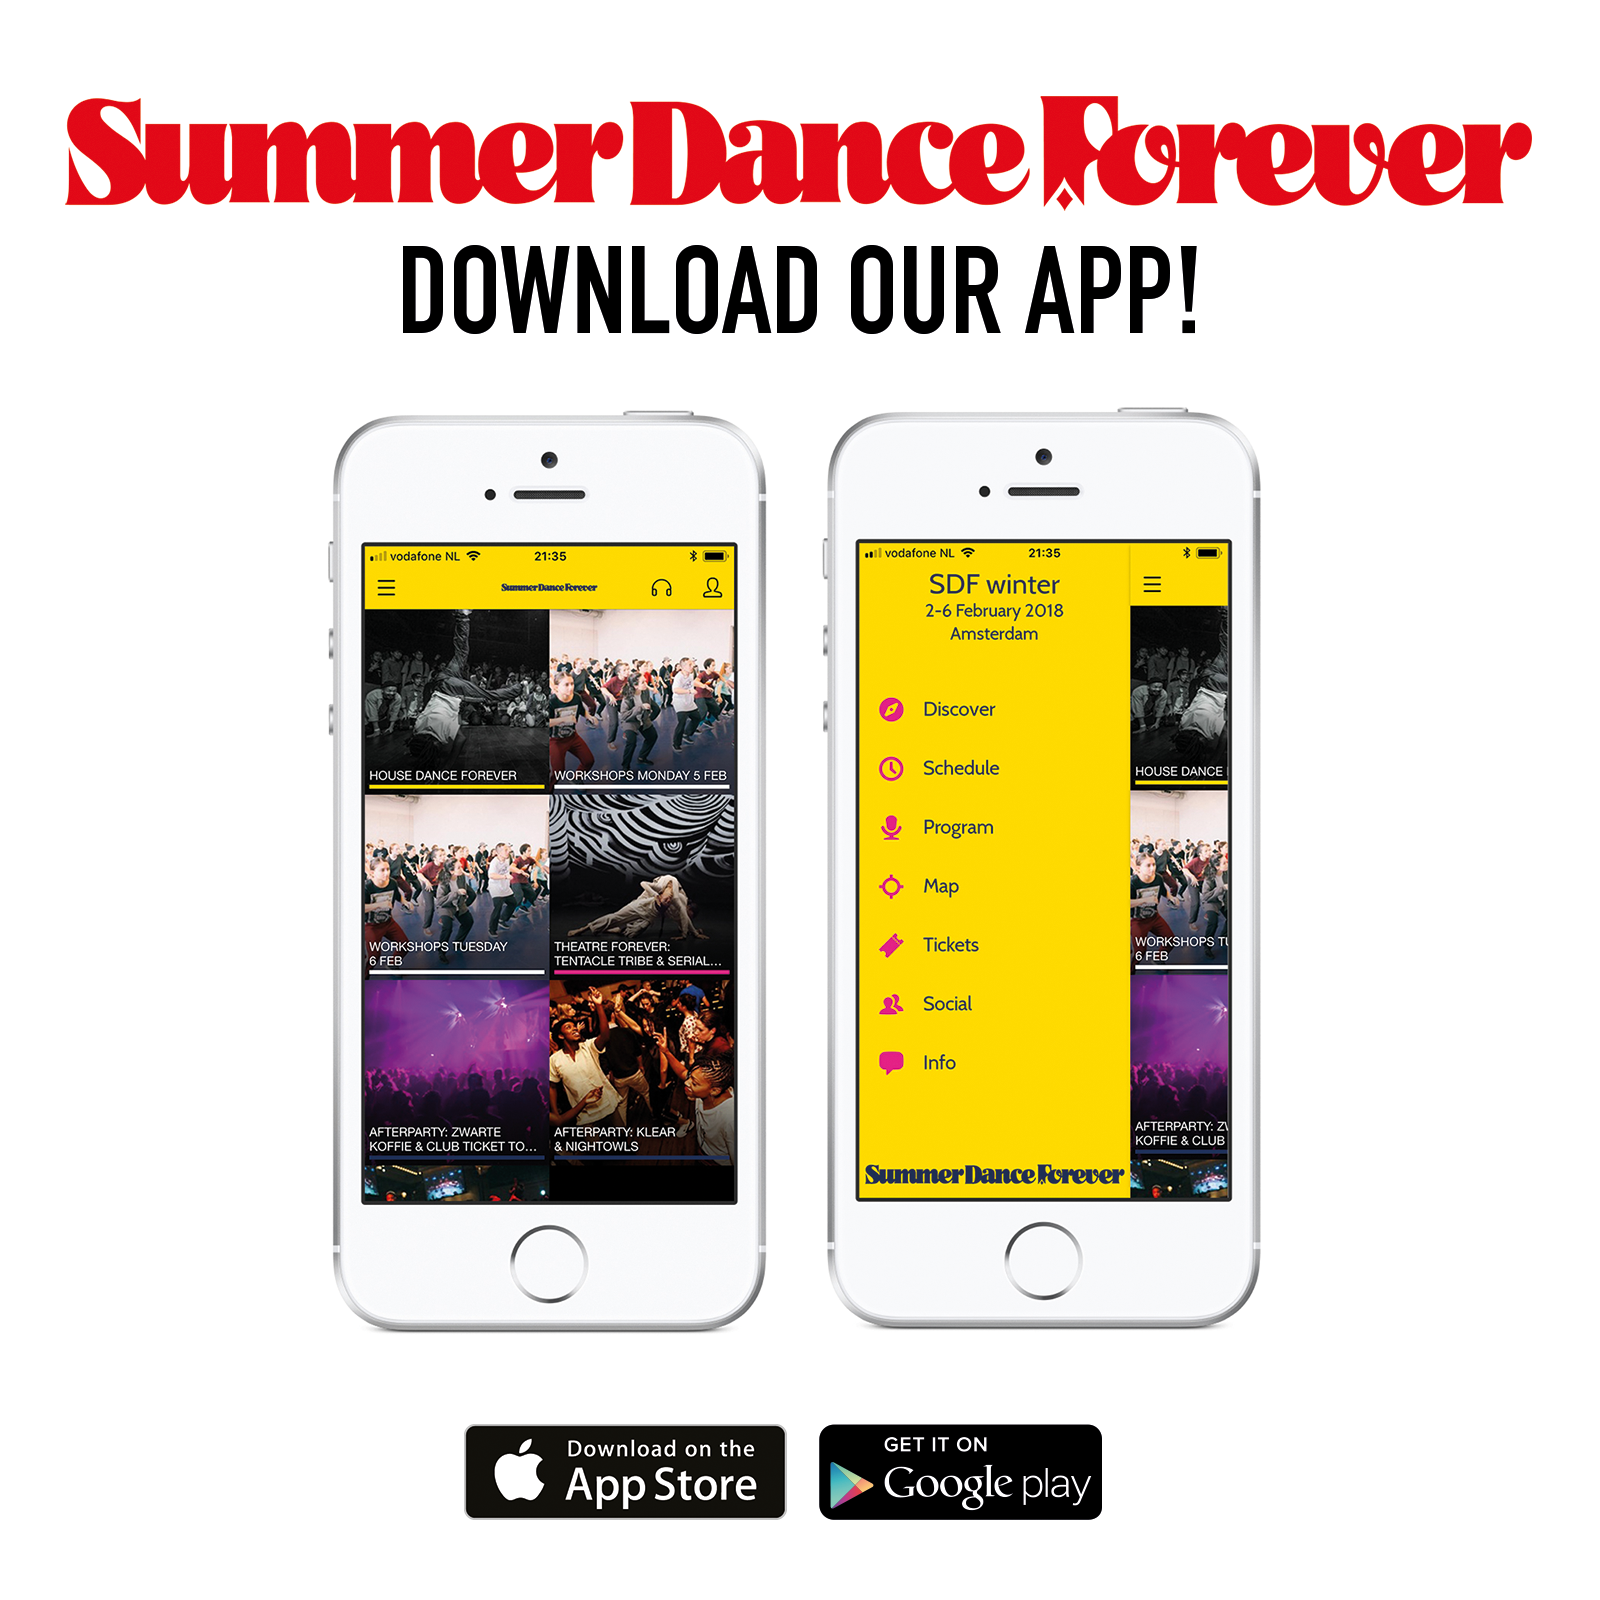 Check out our mobile app!